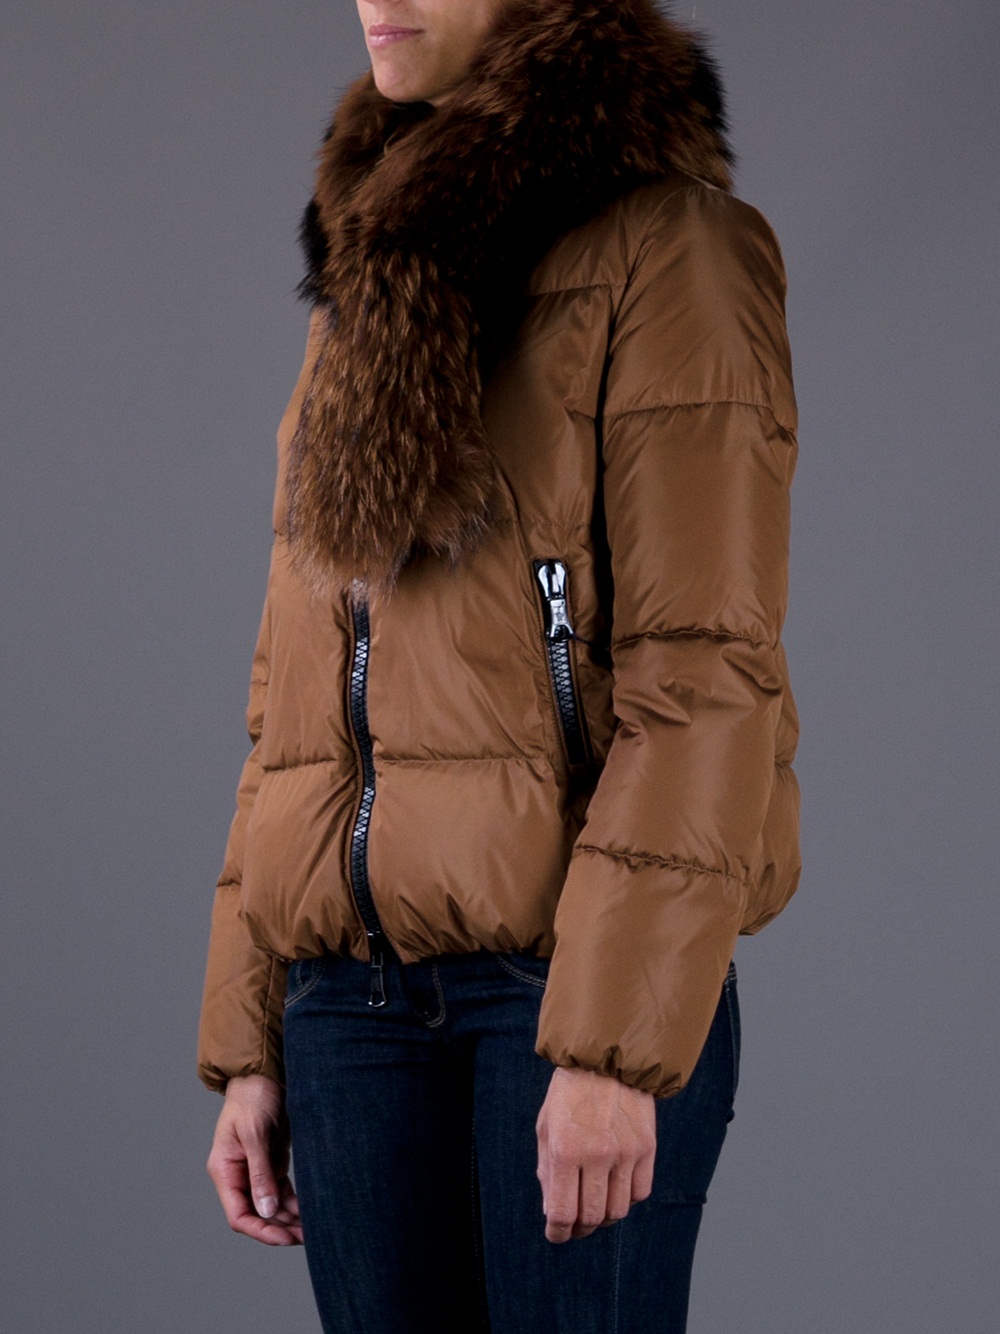 Moncler Lievre Padded Jacket in Bronze (Brown) - Lyst